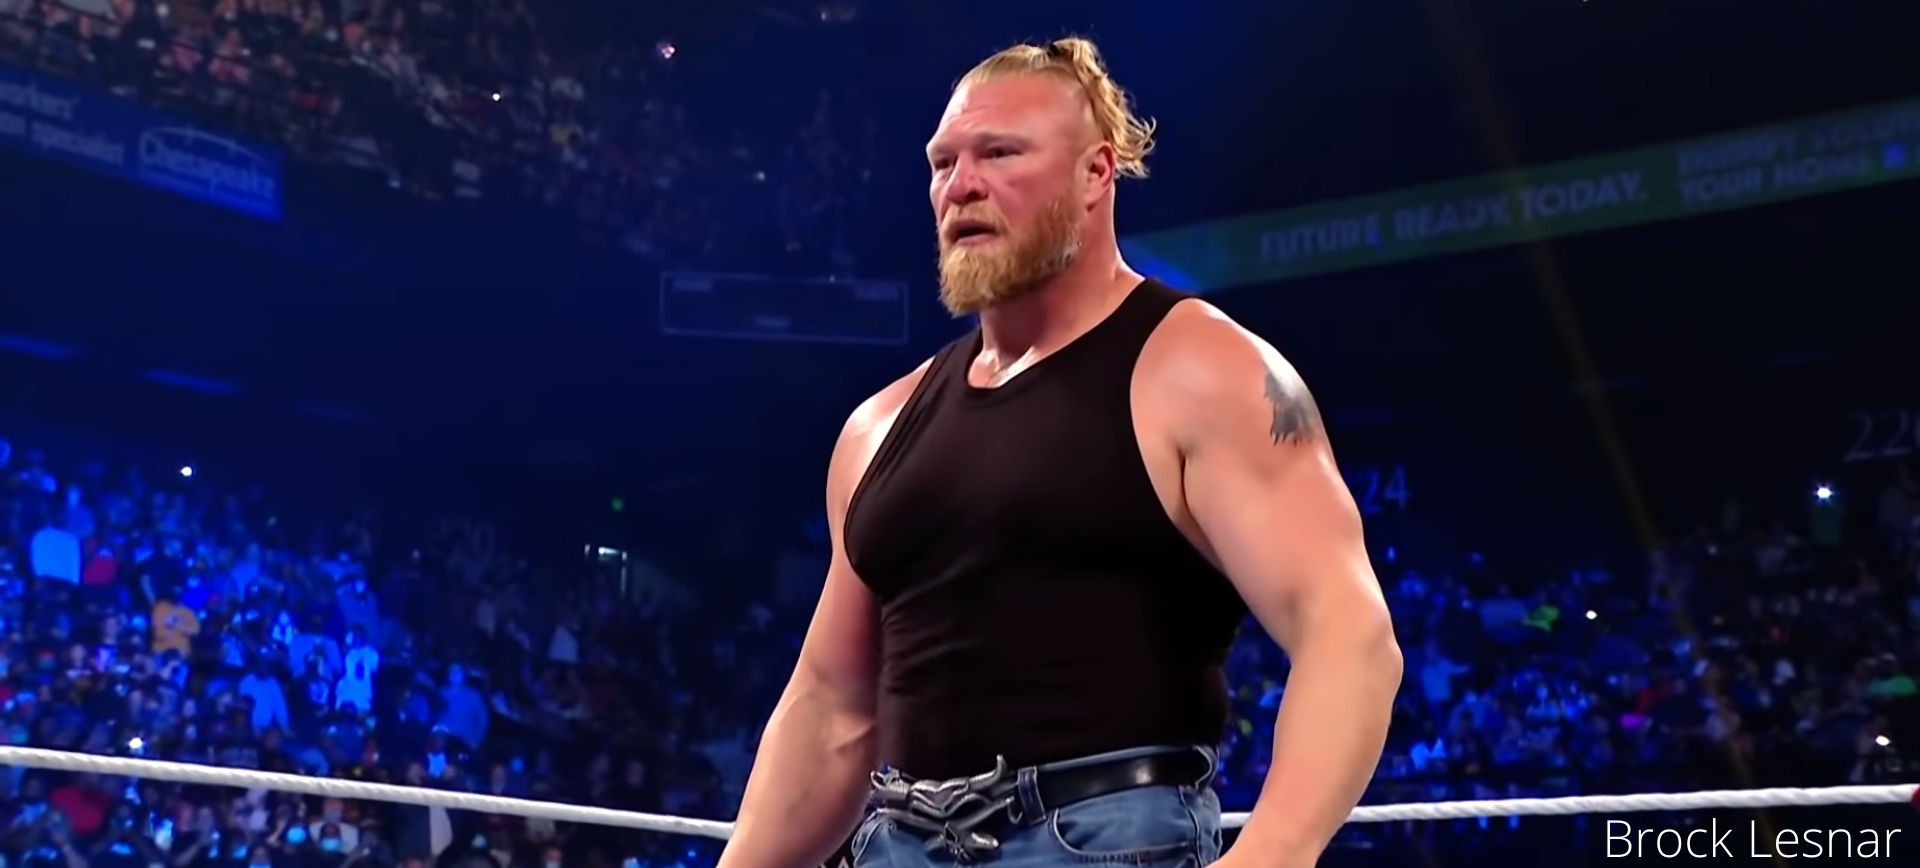 Will Brock Lesnar Come Back To WWE?